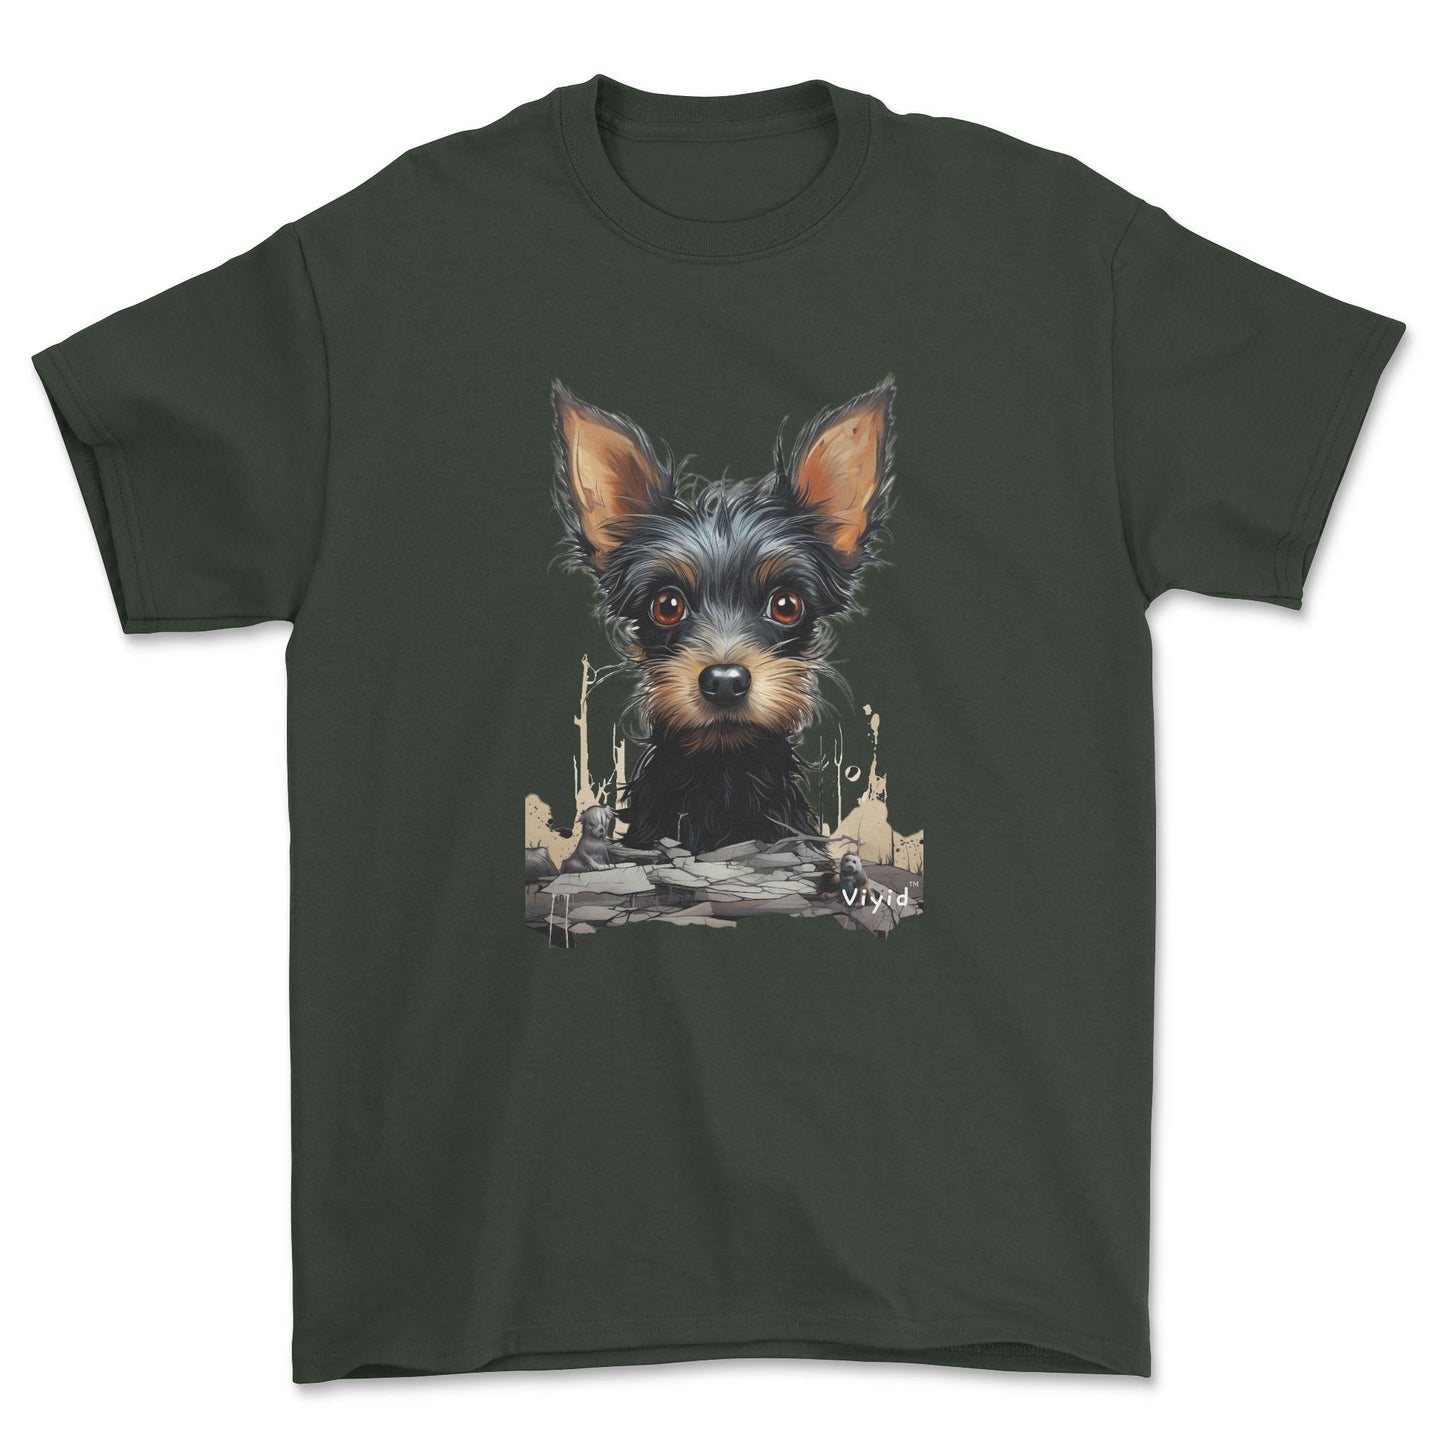 black Yorkshire Terrier drawing adult t-shirt forest green